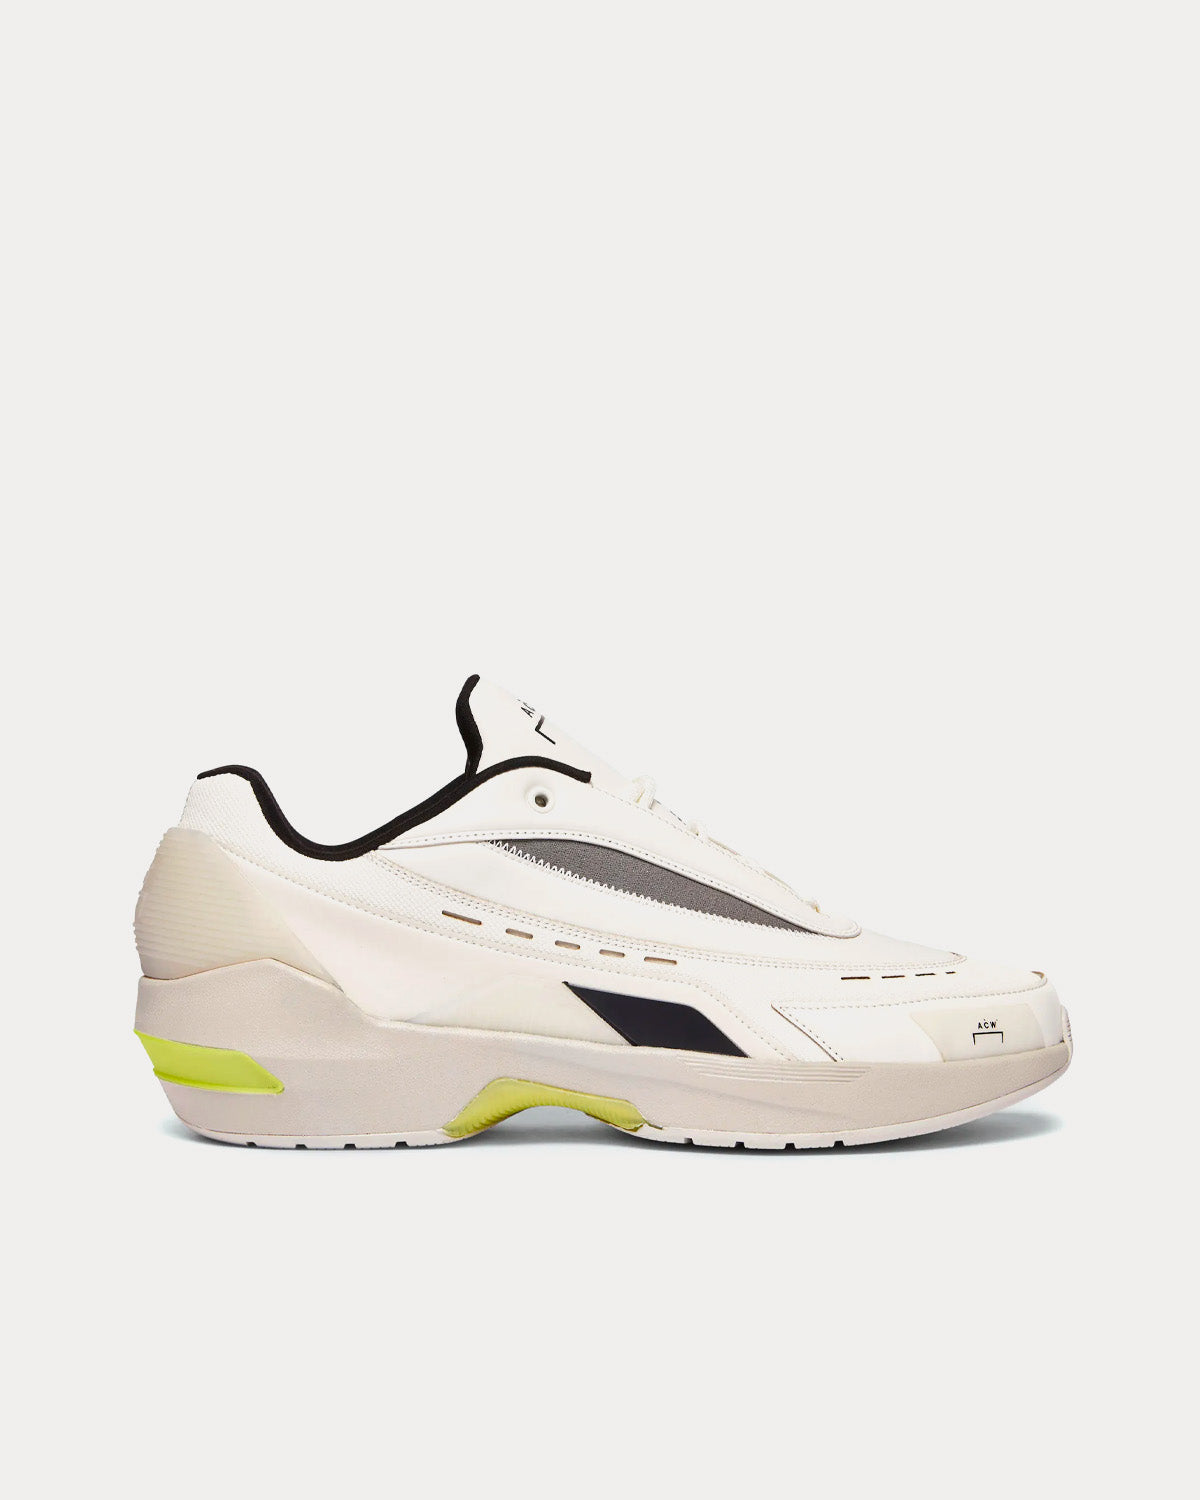 A-COLD-WALL* - Vector* Runner Off-White / Fluo Yellow Low Top Sneakers